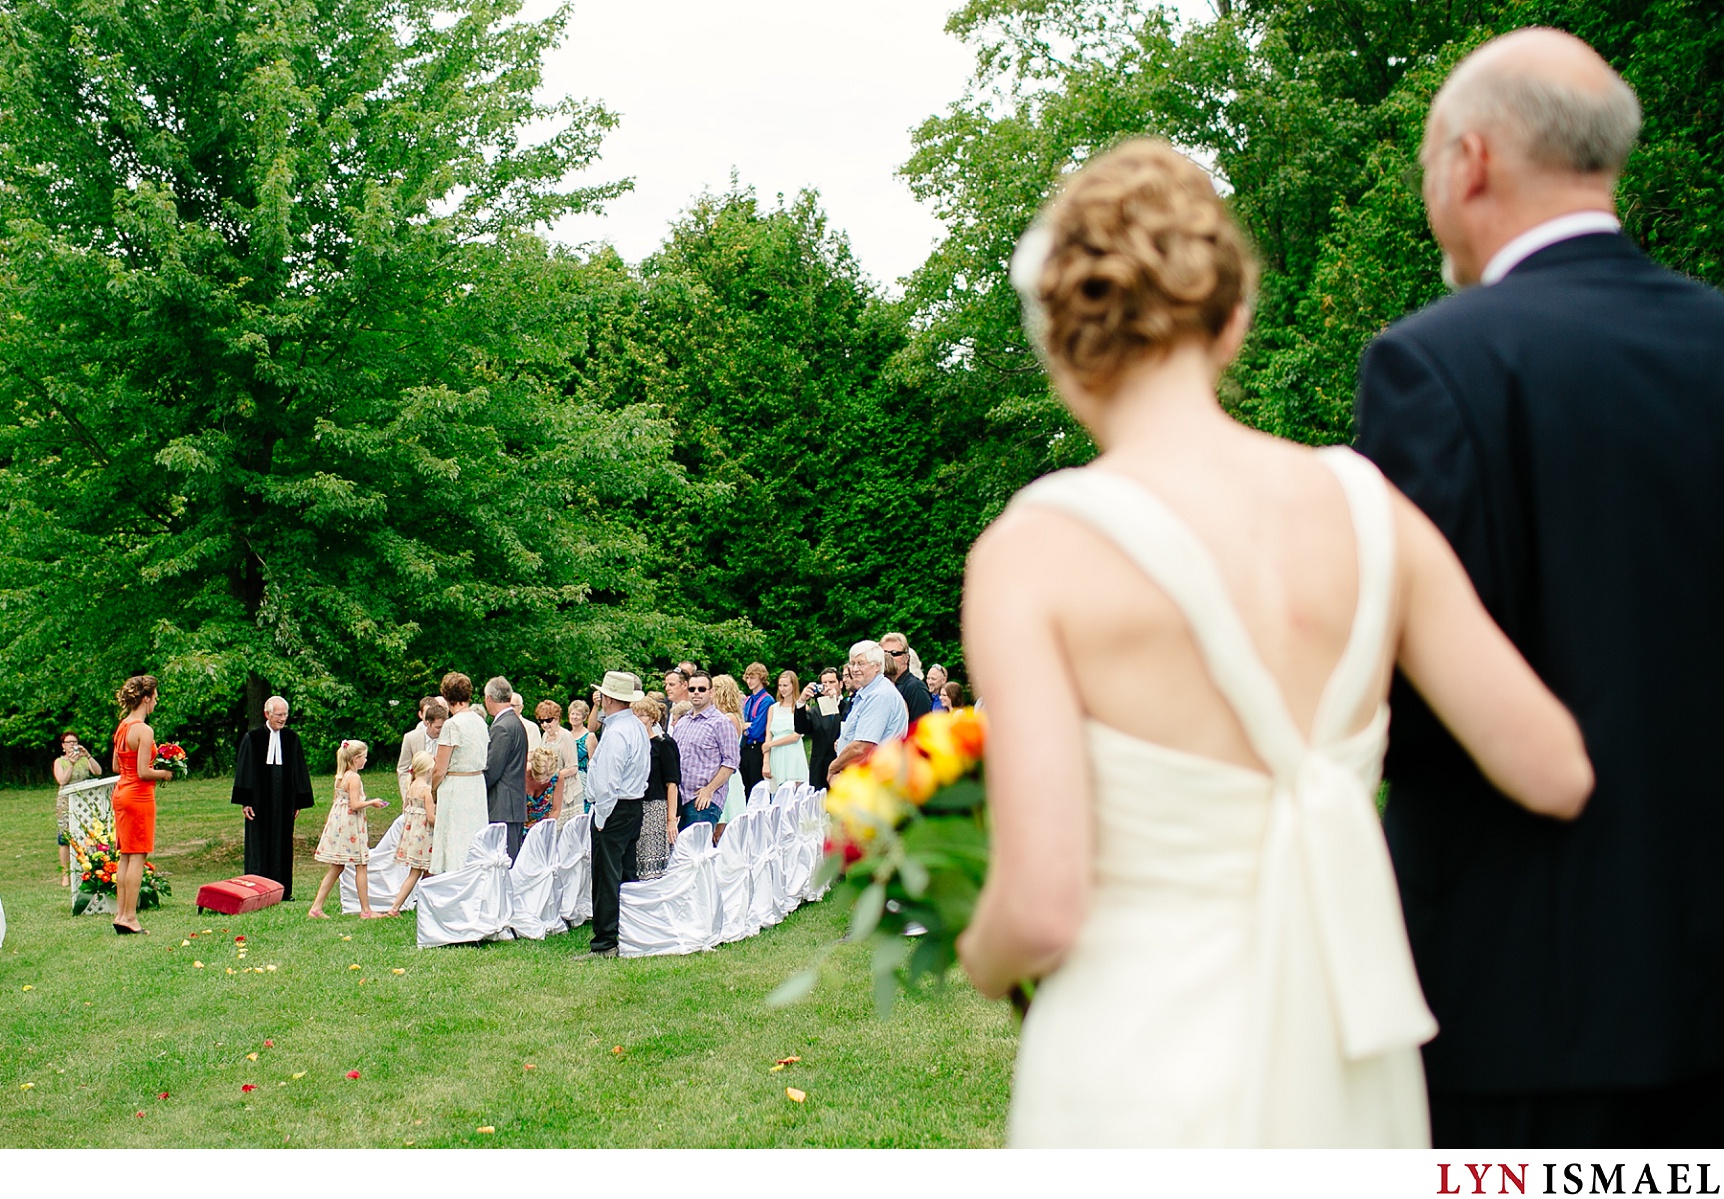 The guests watches the bride walk down the aisle.